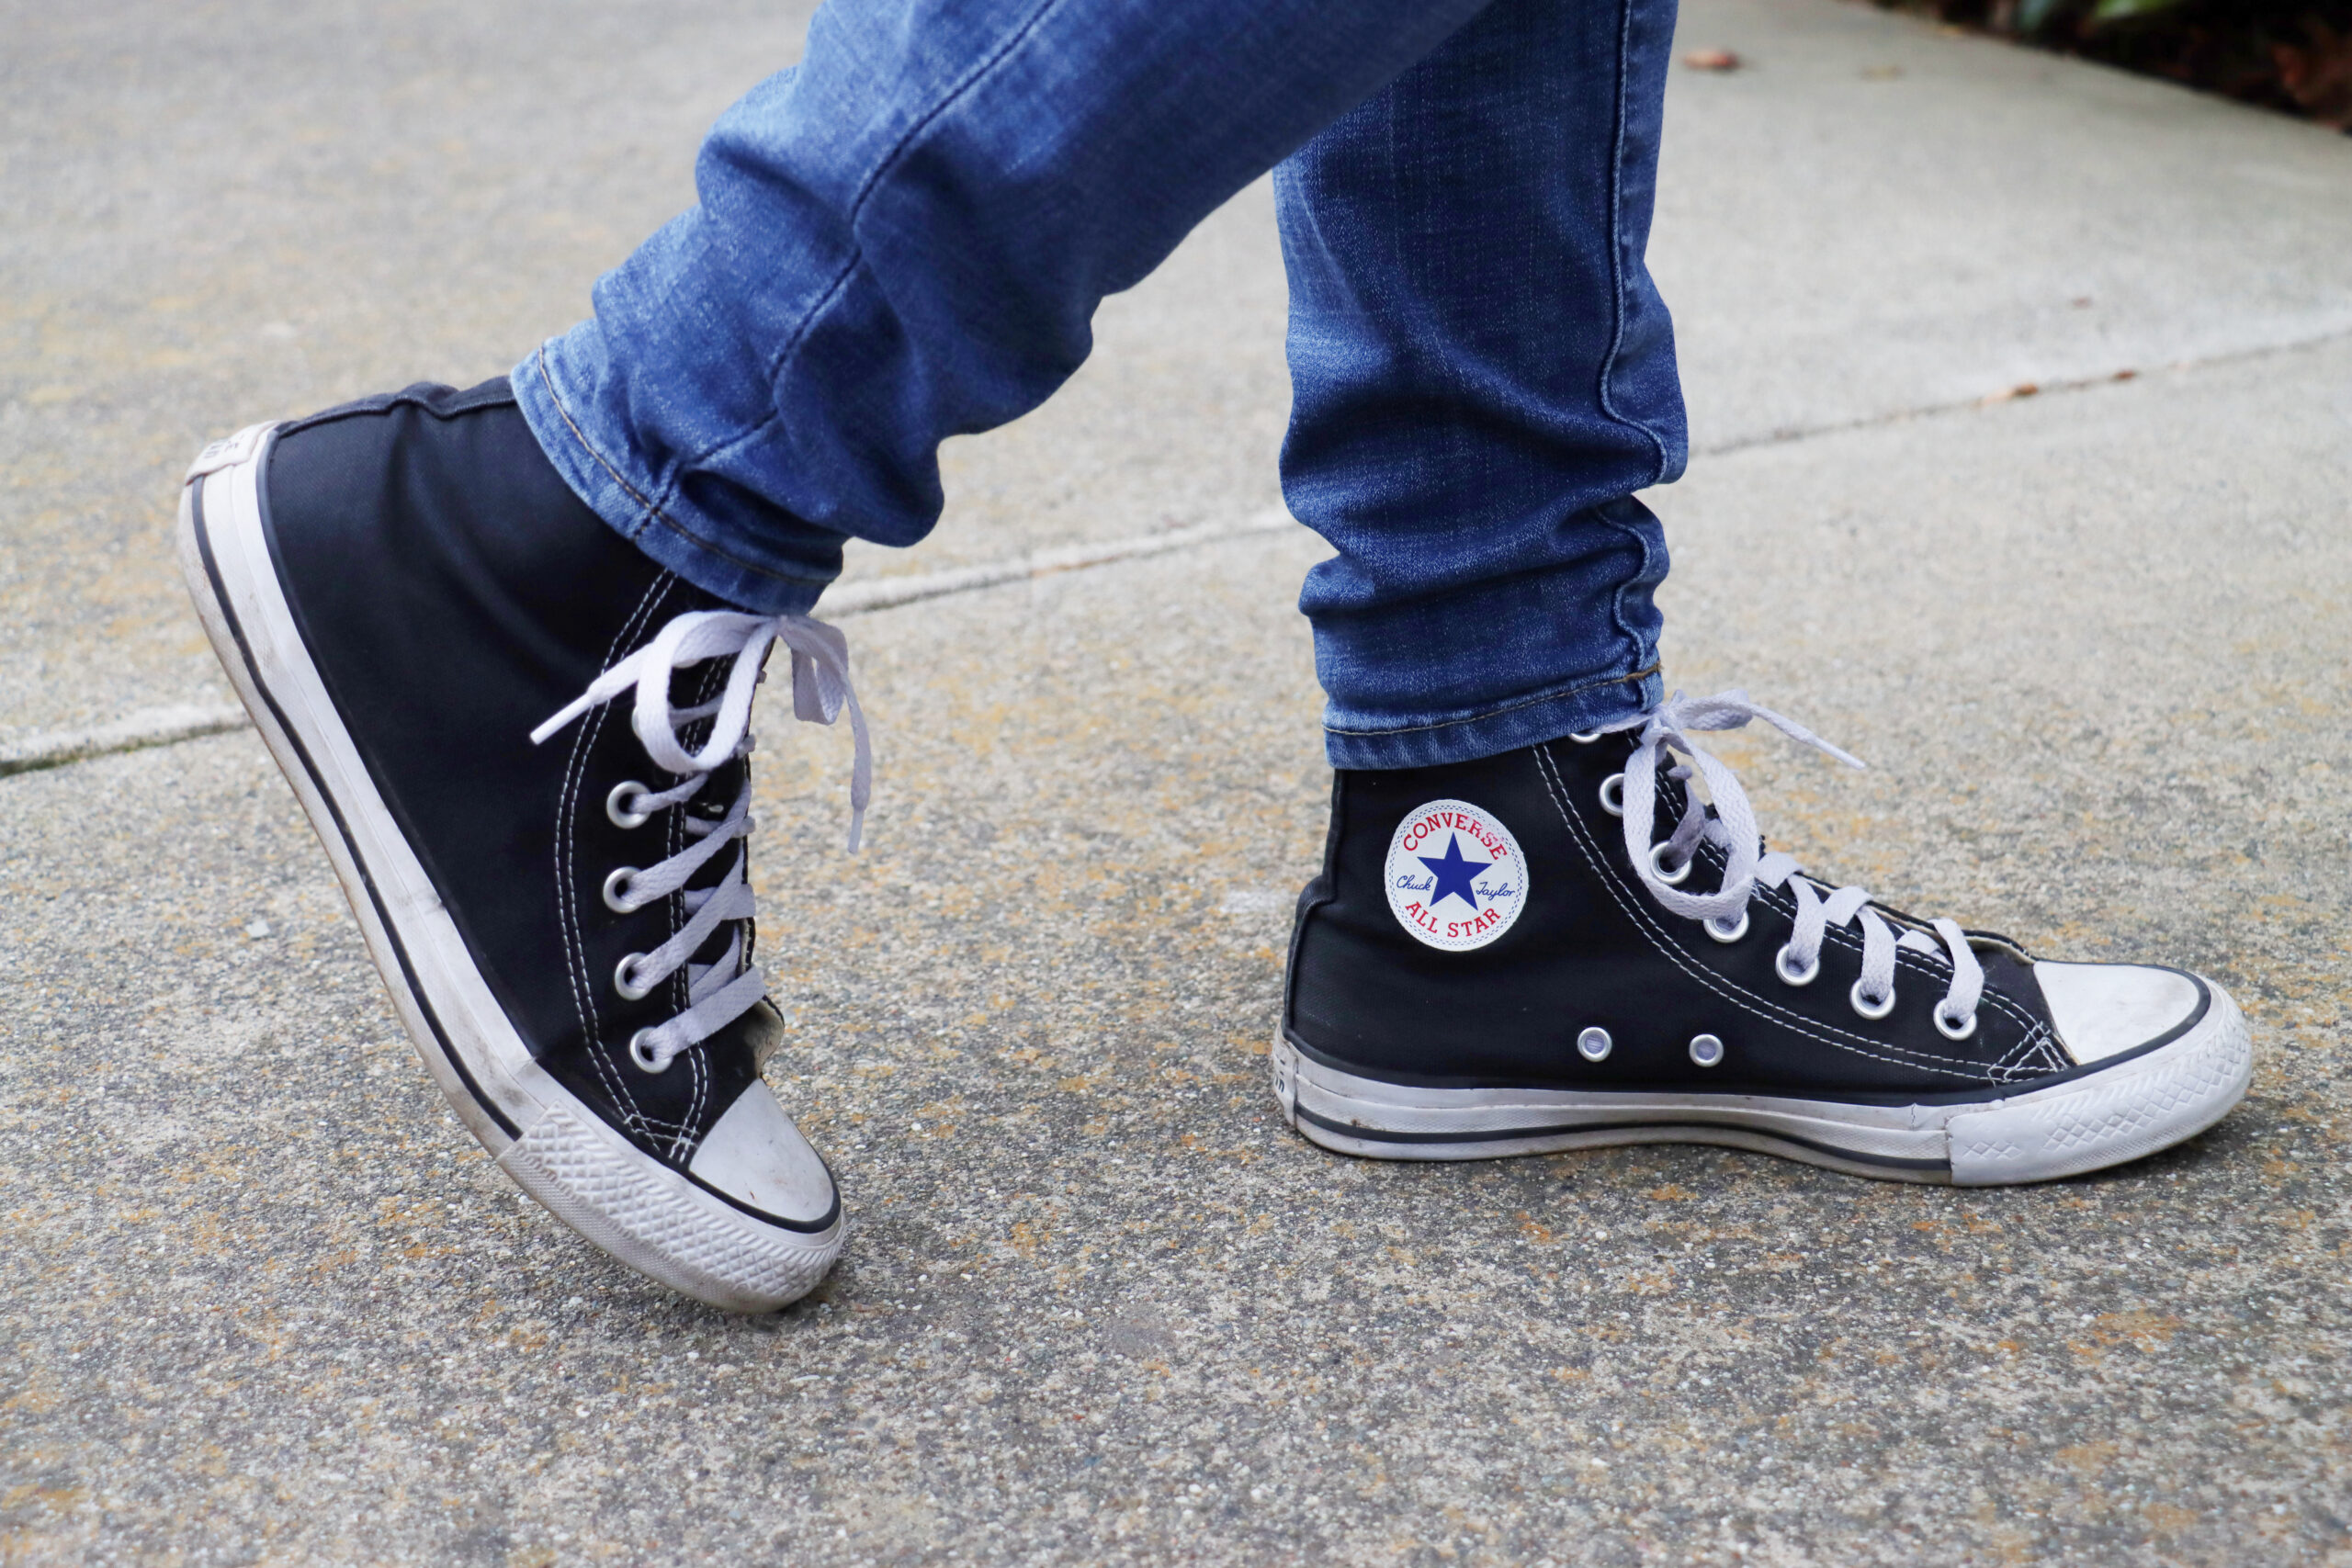 The history of Converse - The